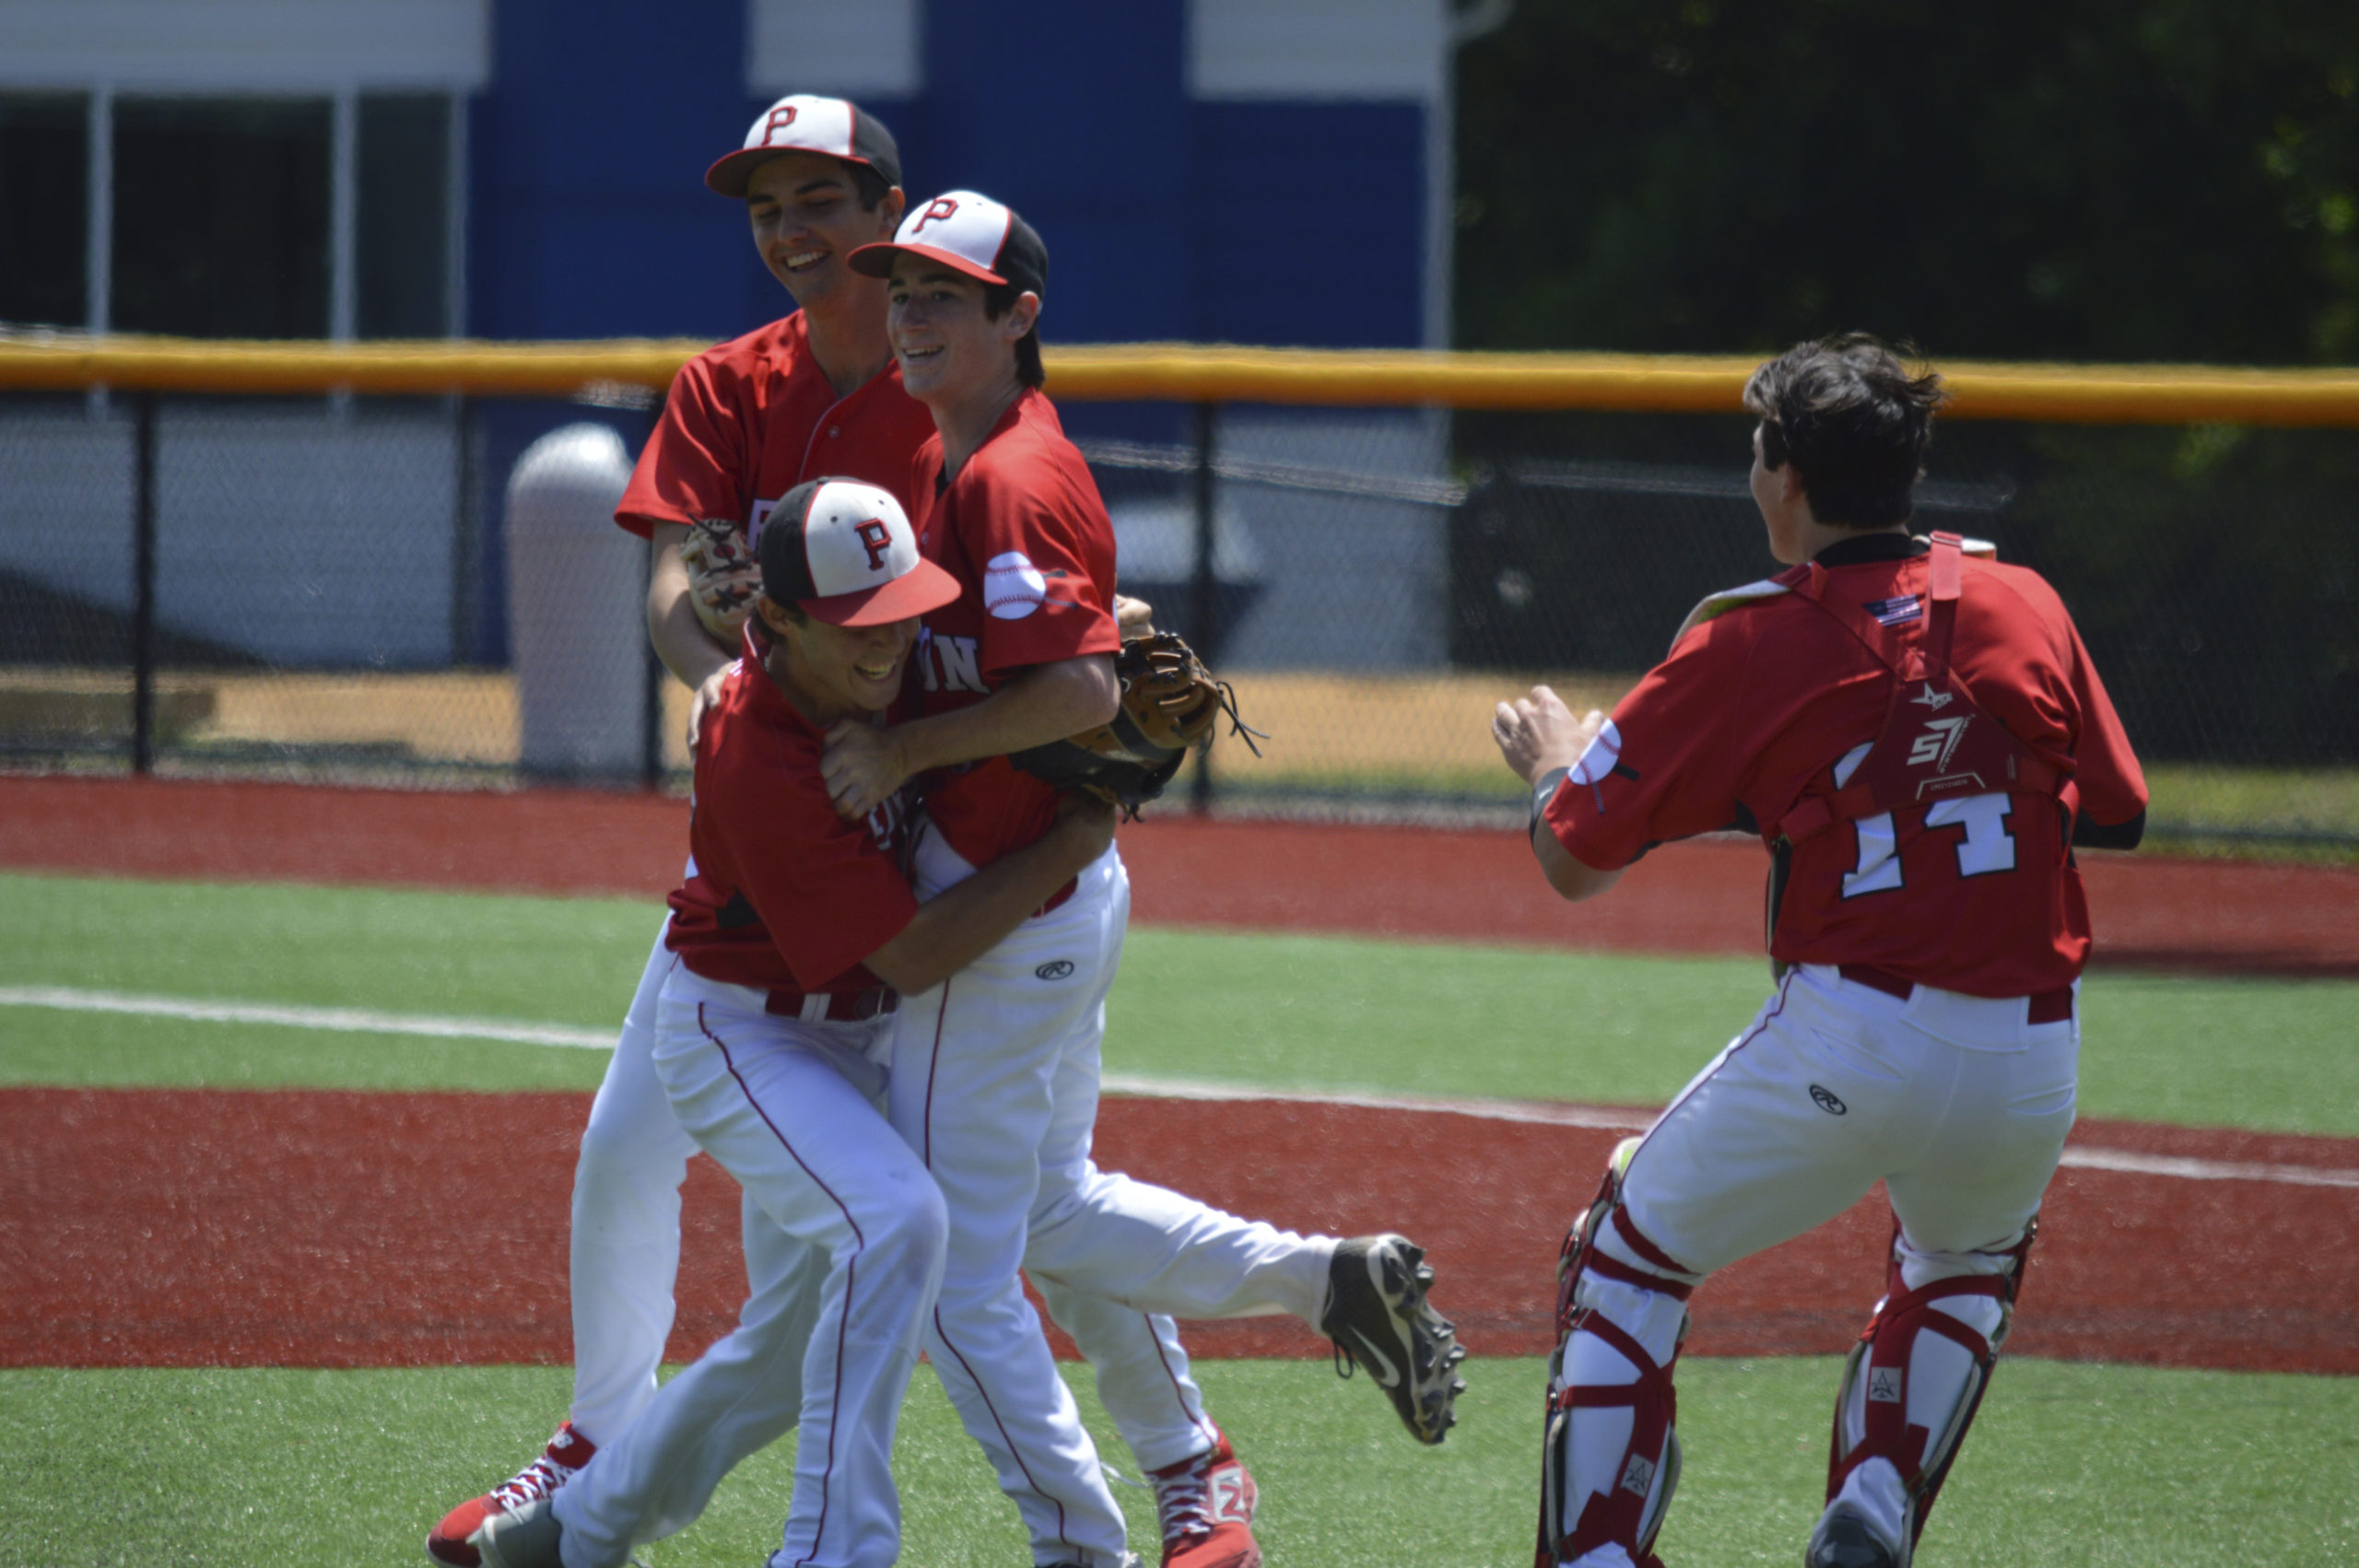 Whalers Are Heading To State FInal Four 
June 13 -The Pierson/Bridgehampton baseball team made its improbable run all the way to the New York State Class C Final Four this past season.